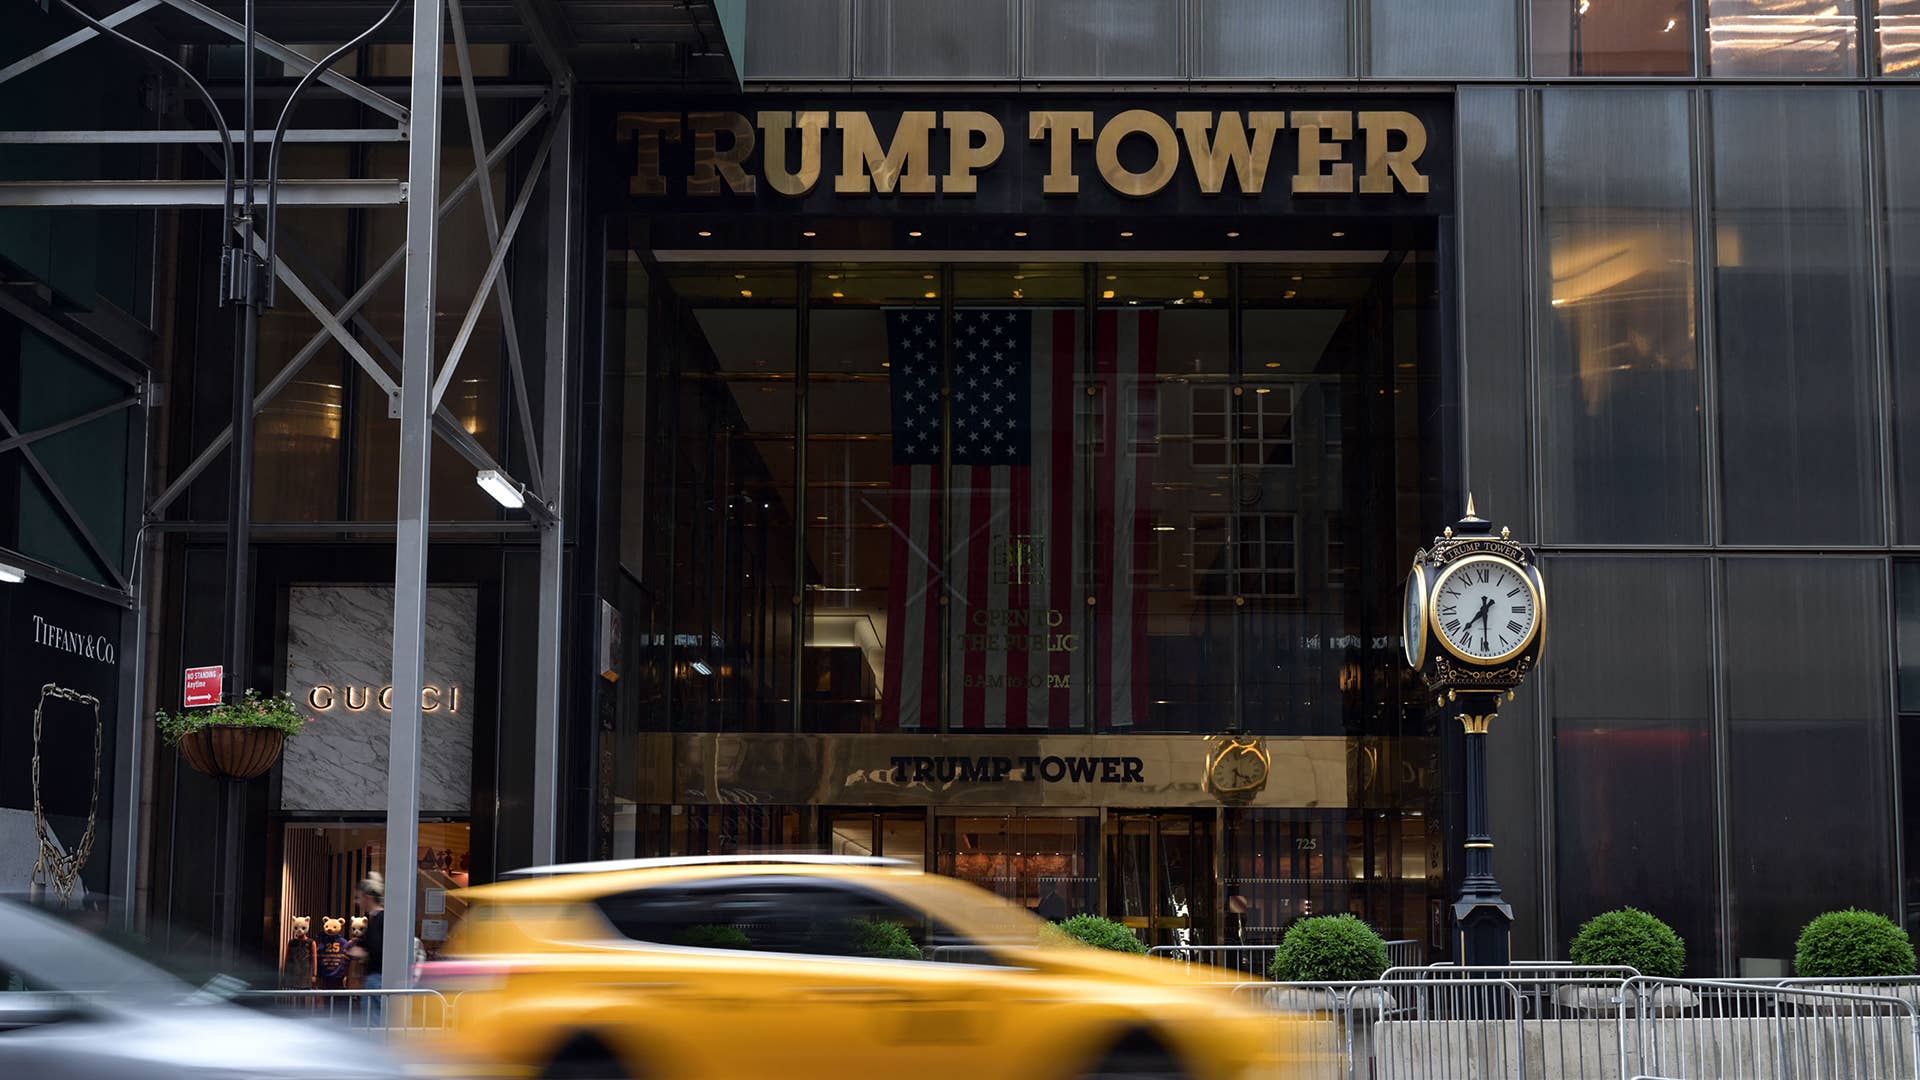 Trump Tower building in Manhattan, New York City in July 2021